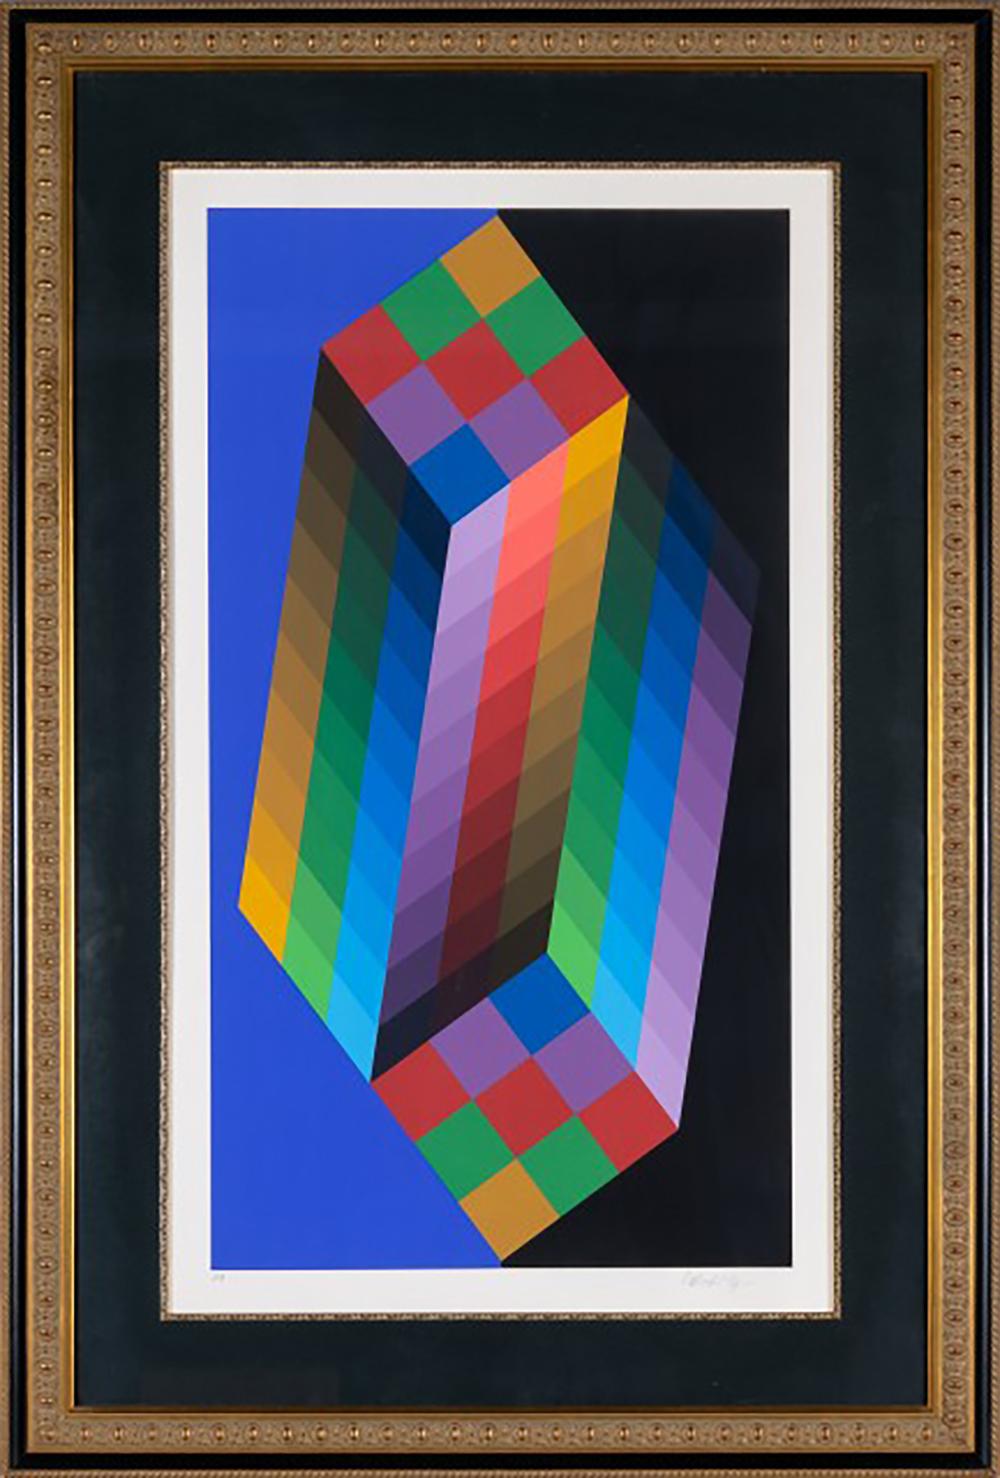 TORONY - Print by Victor Vasarely